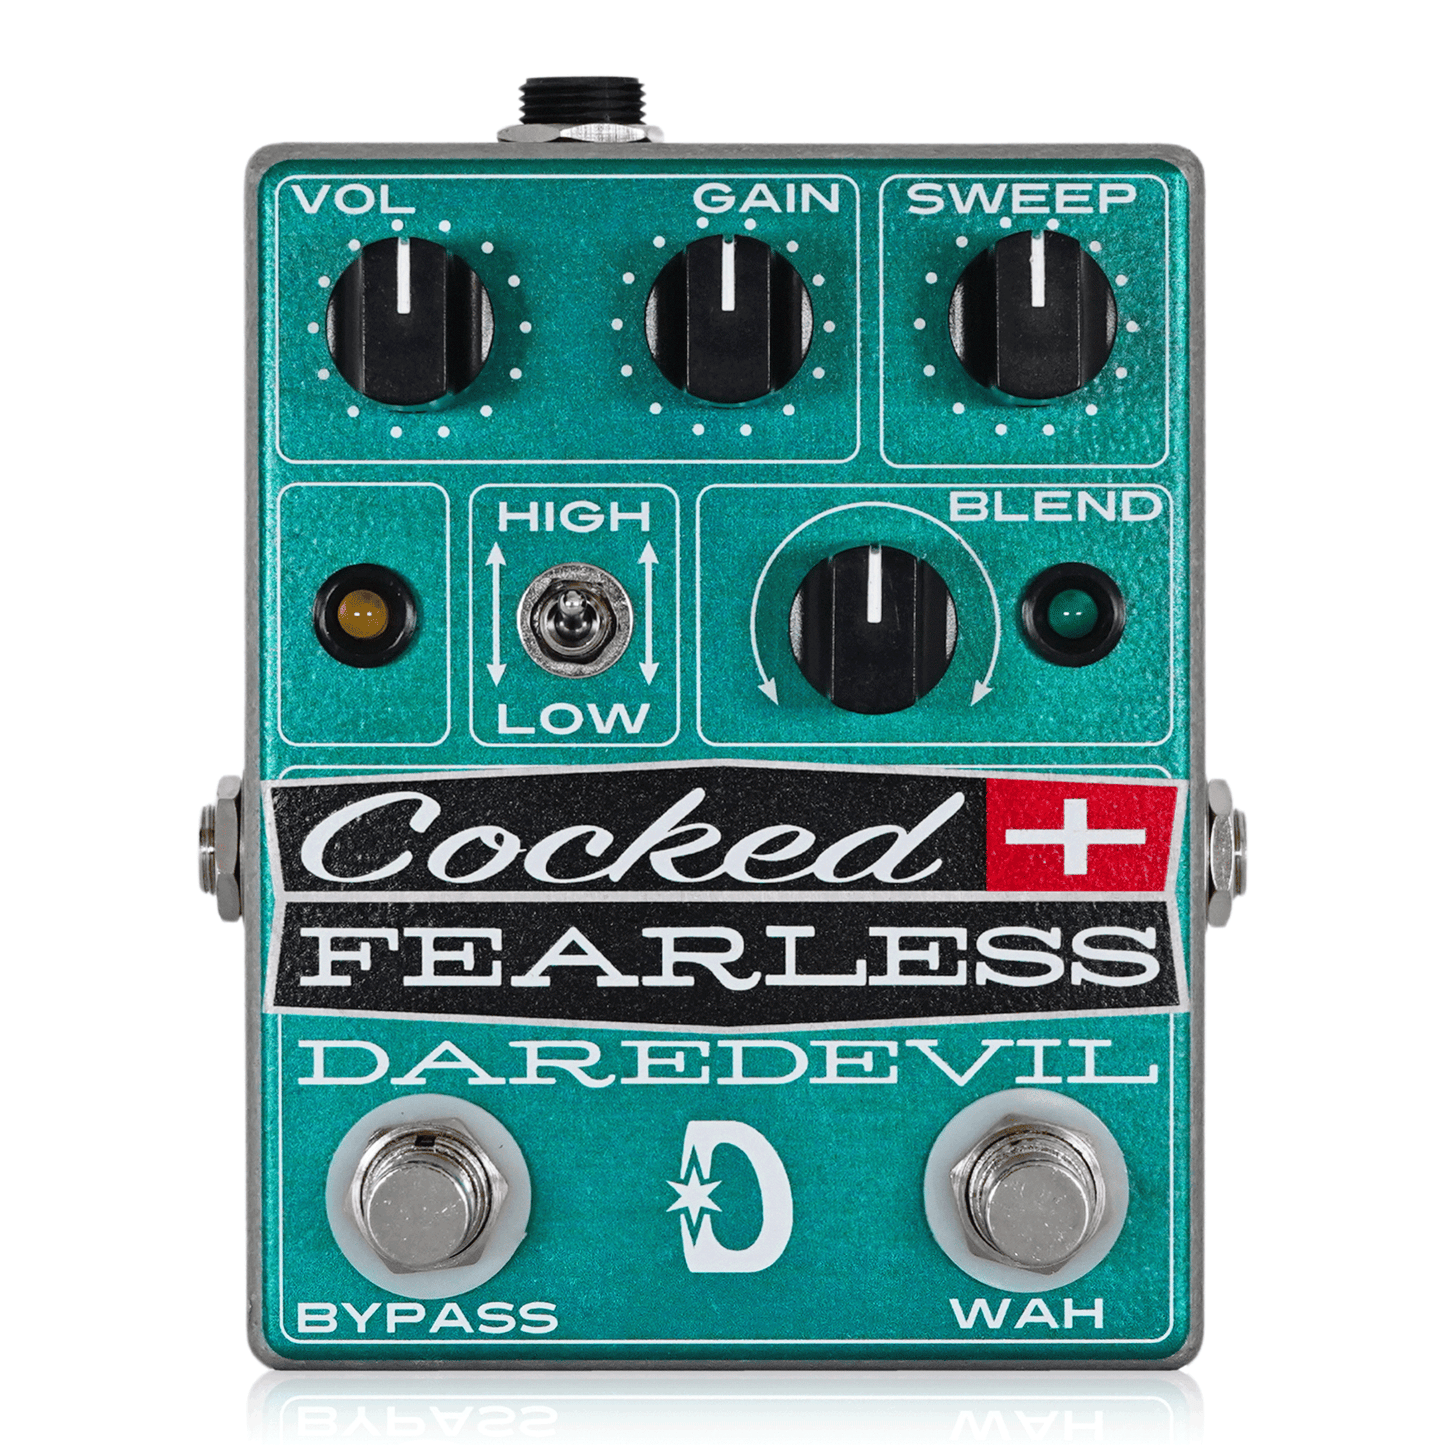 Daredevil Pedals/Cocked and Fearless